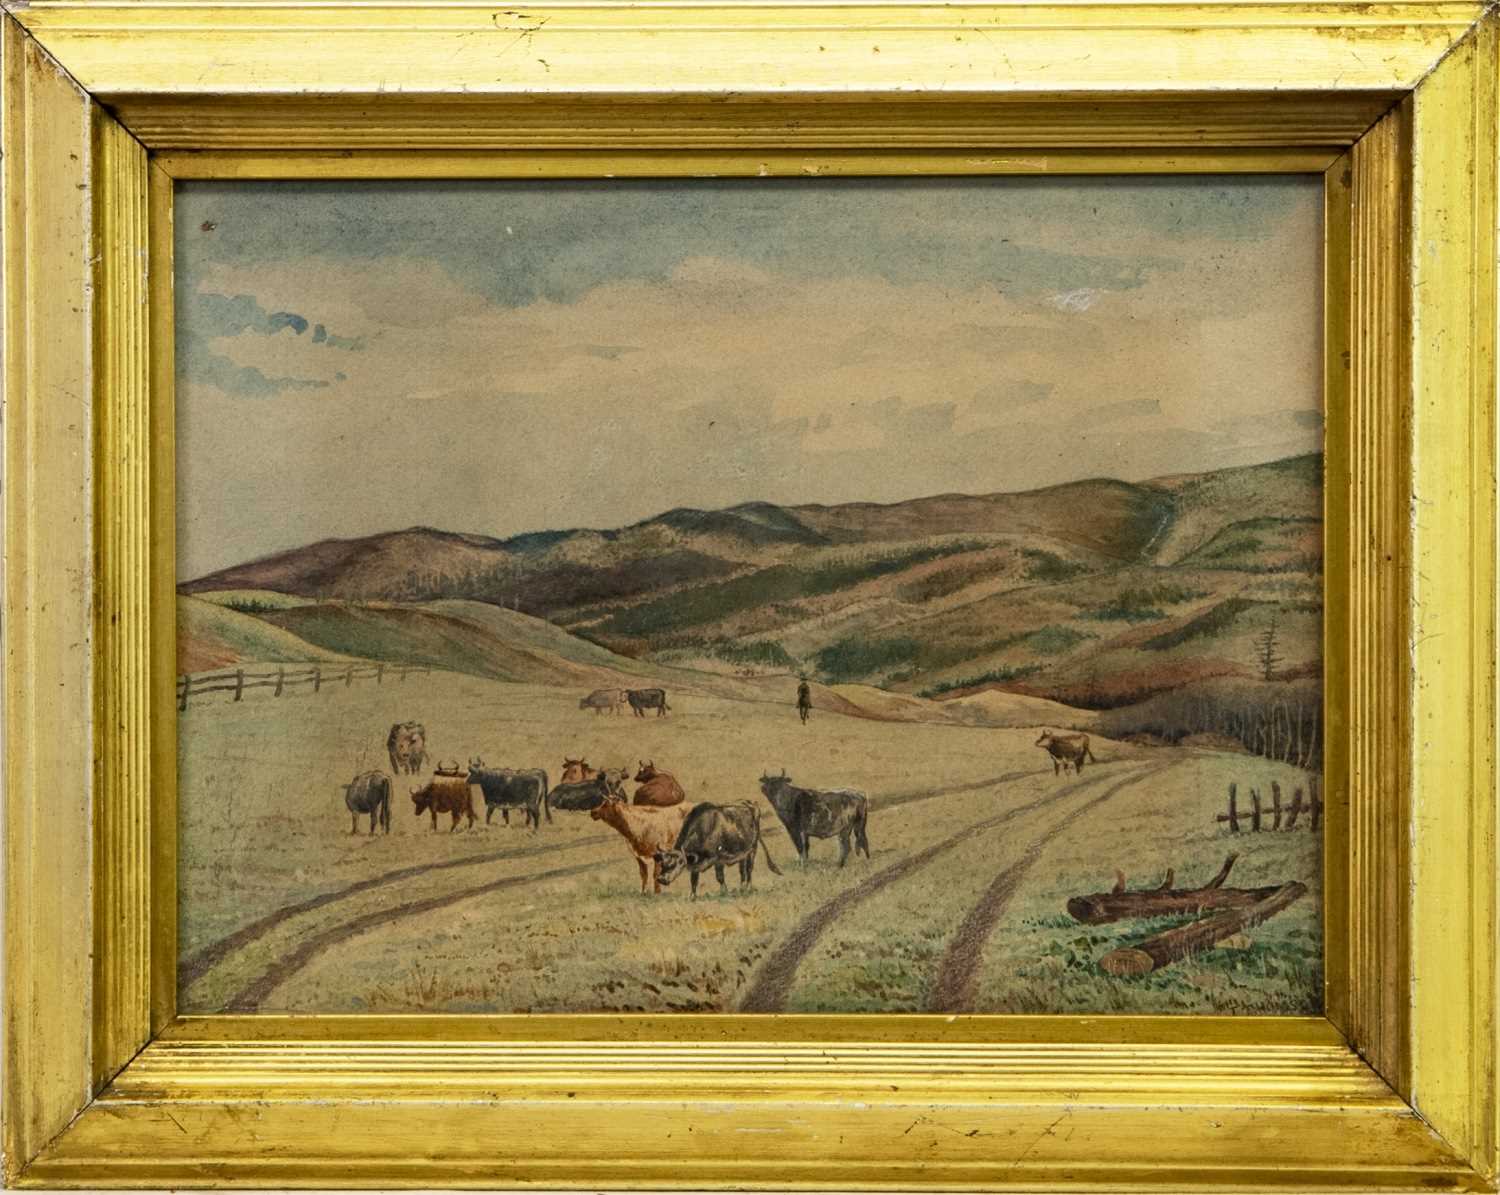 Lot 47 - COWHERD WITH CATTLE, A WATERCOLOUR BY THOMAS JOHN THOMSON